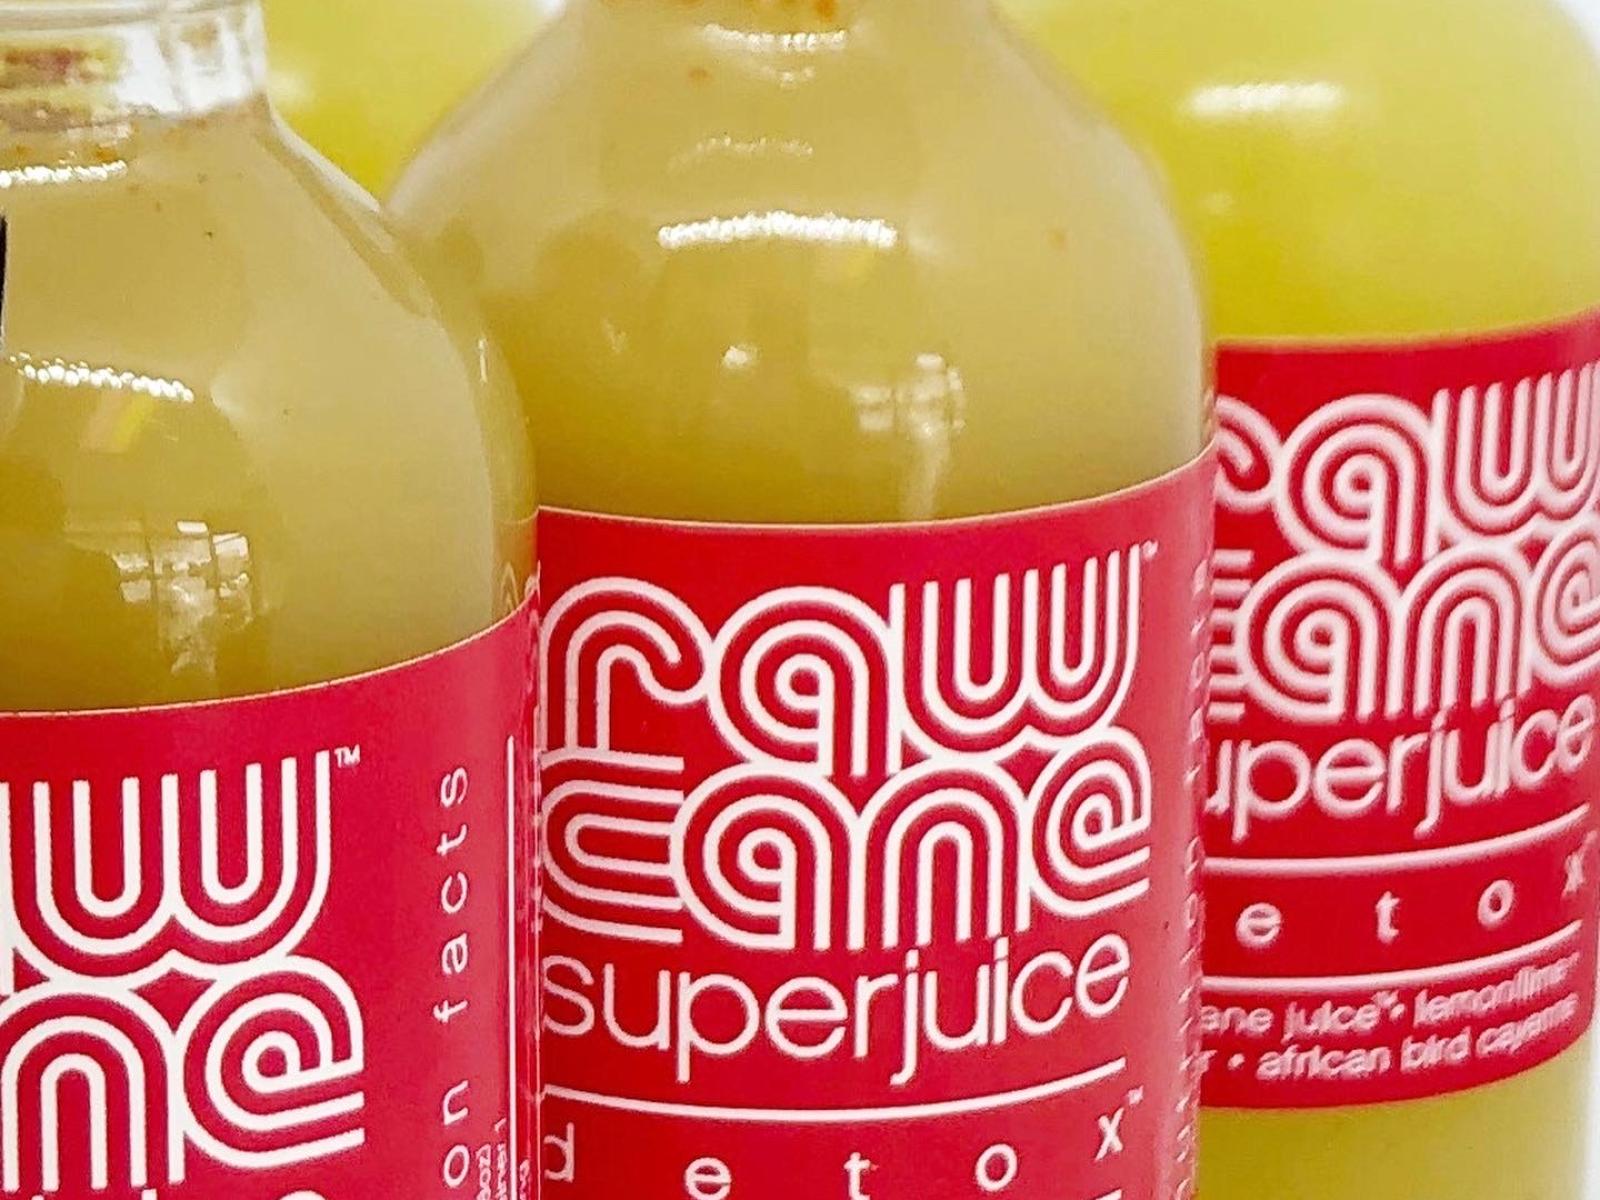 Main image for business titled Raw Cane SuperJuice